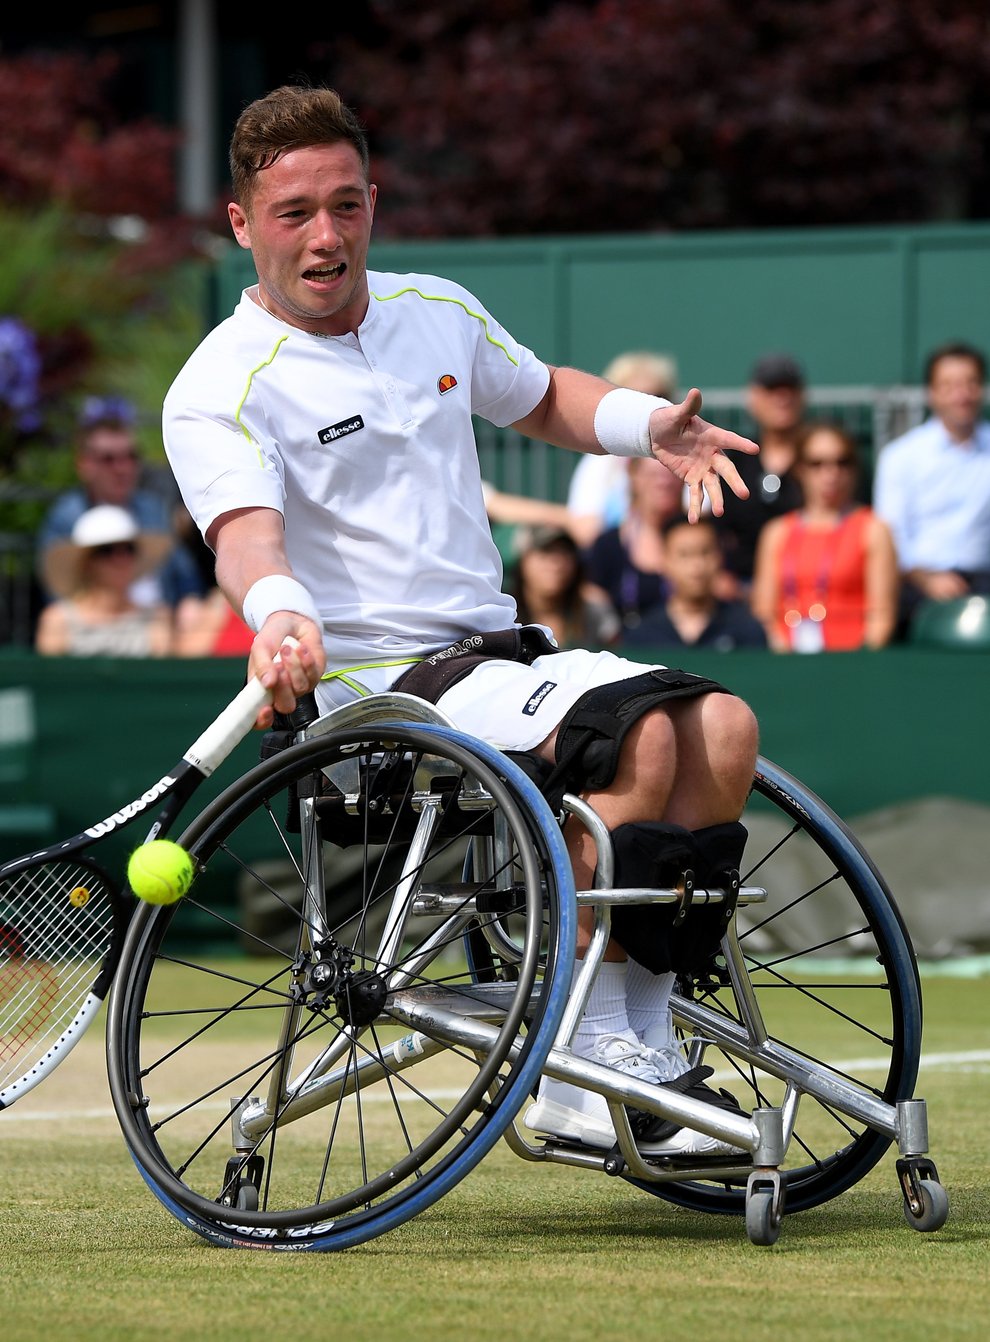 Alfie Hewett will be able to continue his wheelchair tennis career (Victoria Jones/PA)